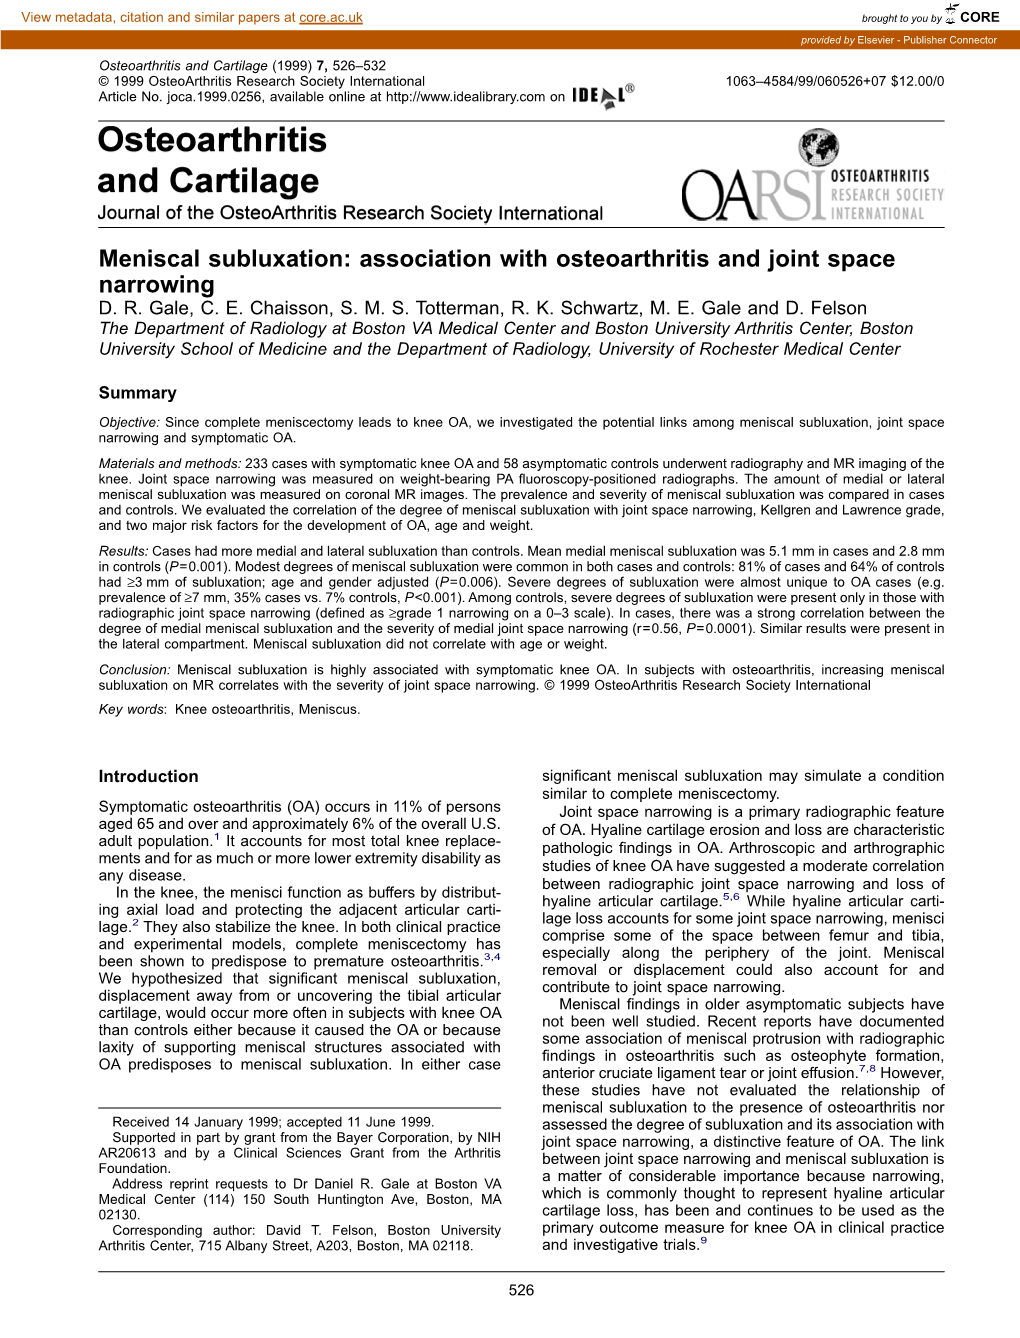 Meniscal Subluxation: Association with Osteoarthritis and Joint Space Narrowing D